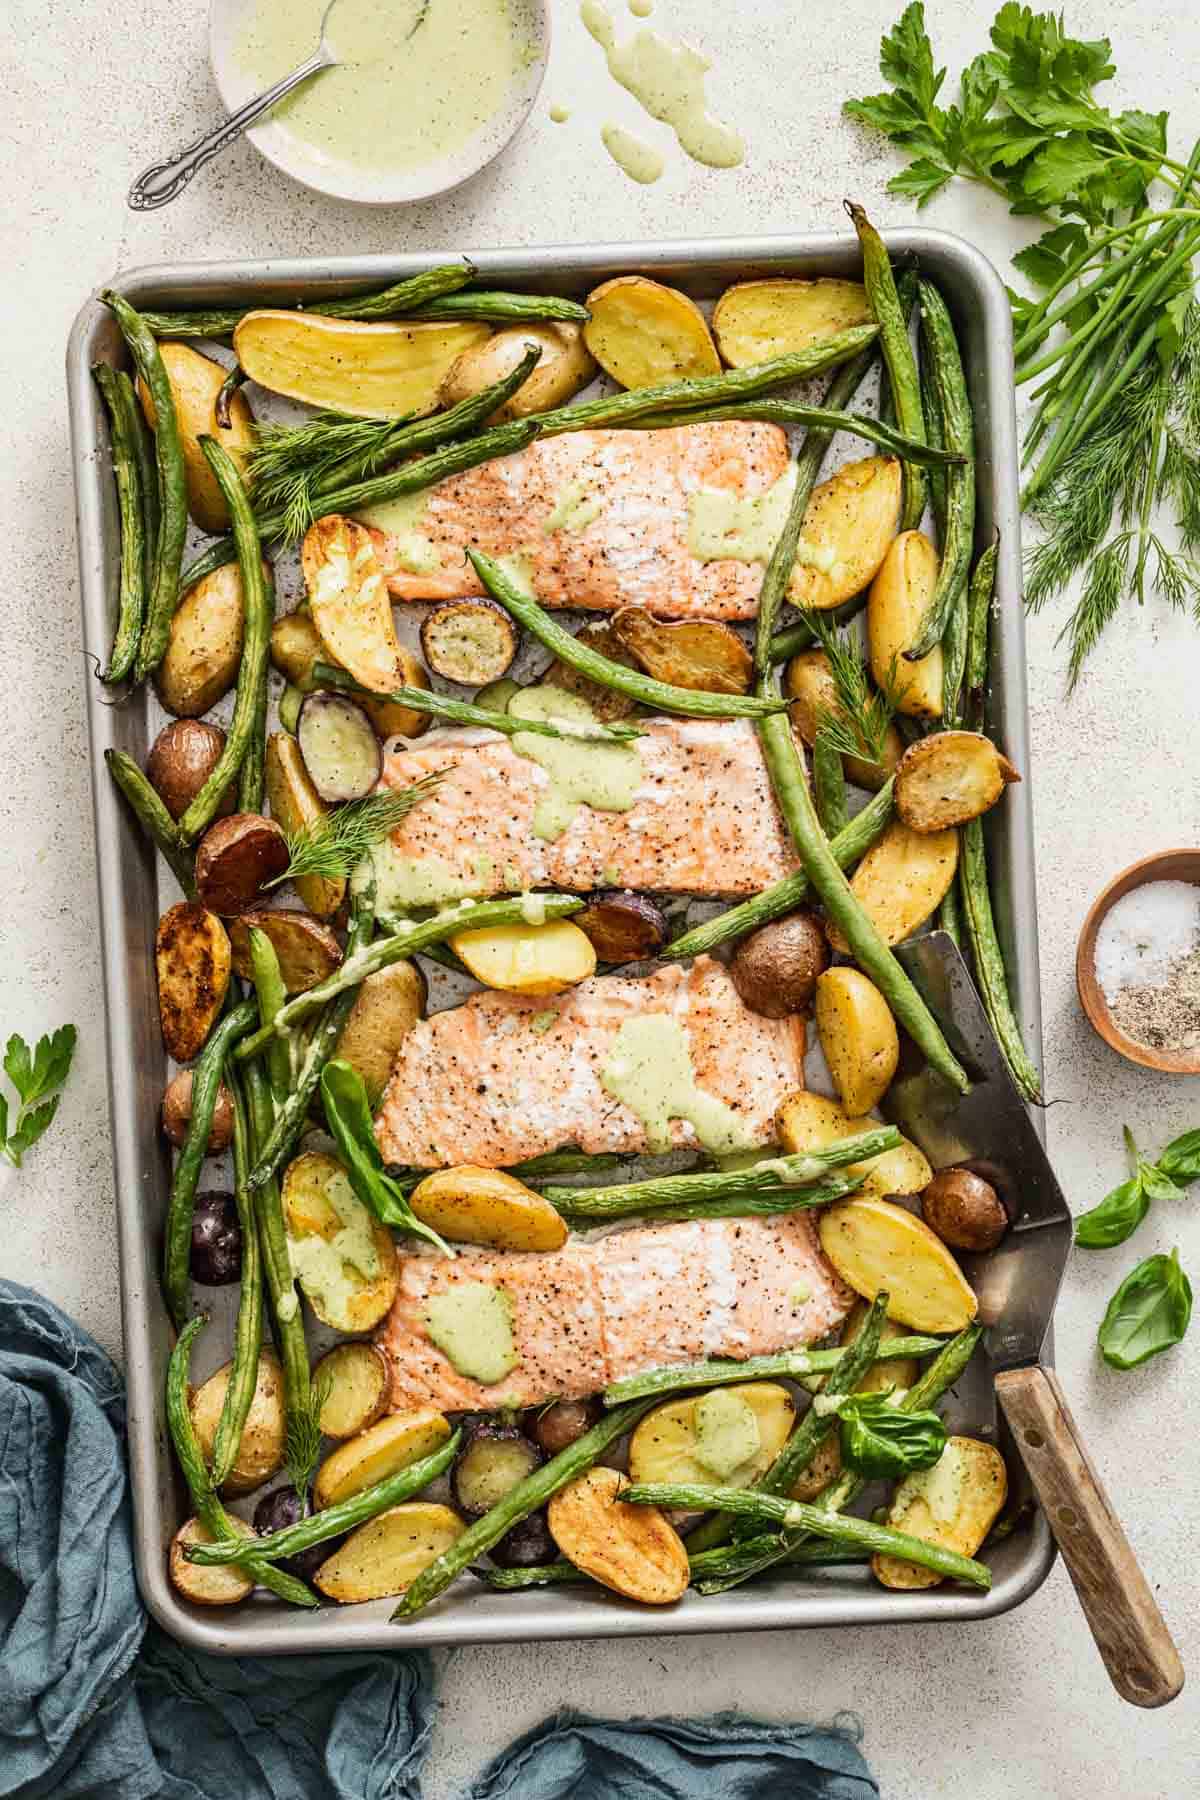 A sheet pan with baked salmon, a sauce, green beans and potatoes next to fresh parsley, green goddess dressing, and a napkin.